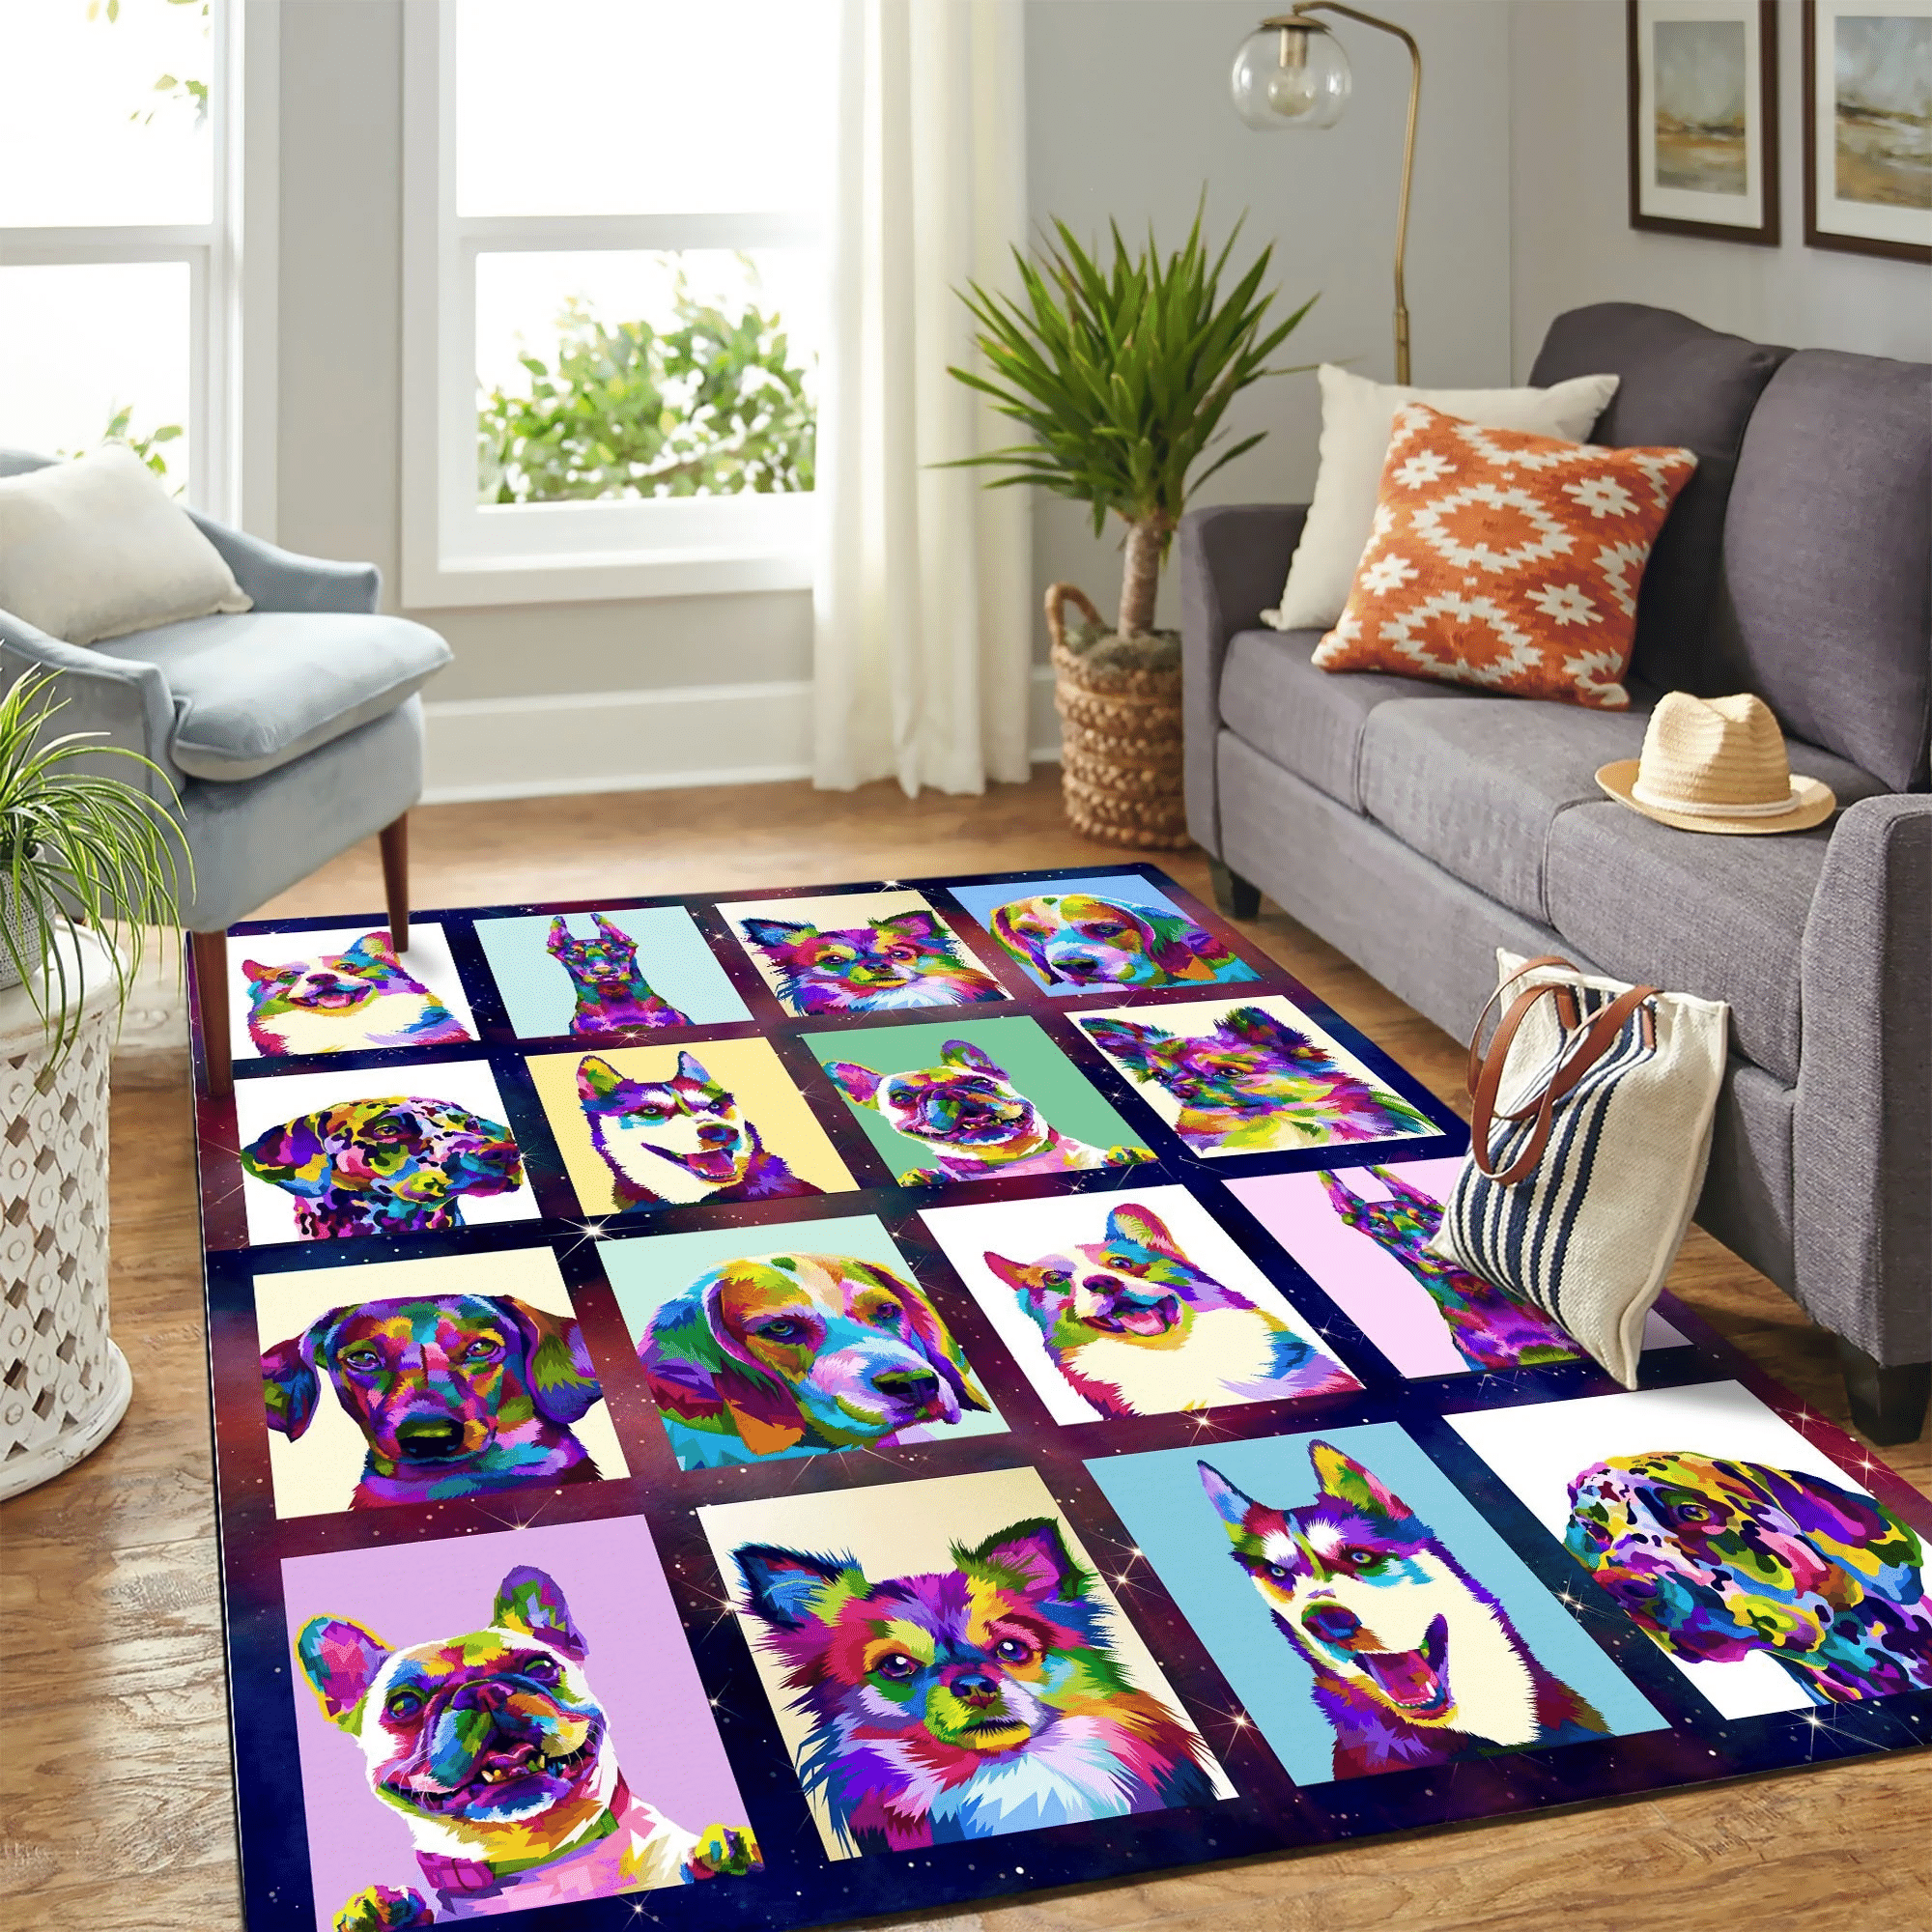 Colours Dogs Mk Carpet Area Rug Chrismas Gift - Indoor Outdoor Rugs